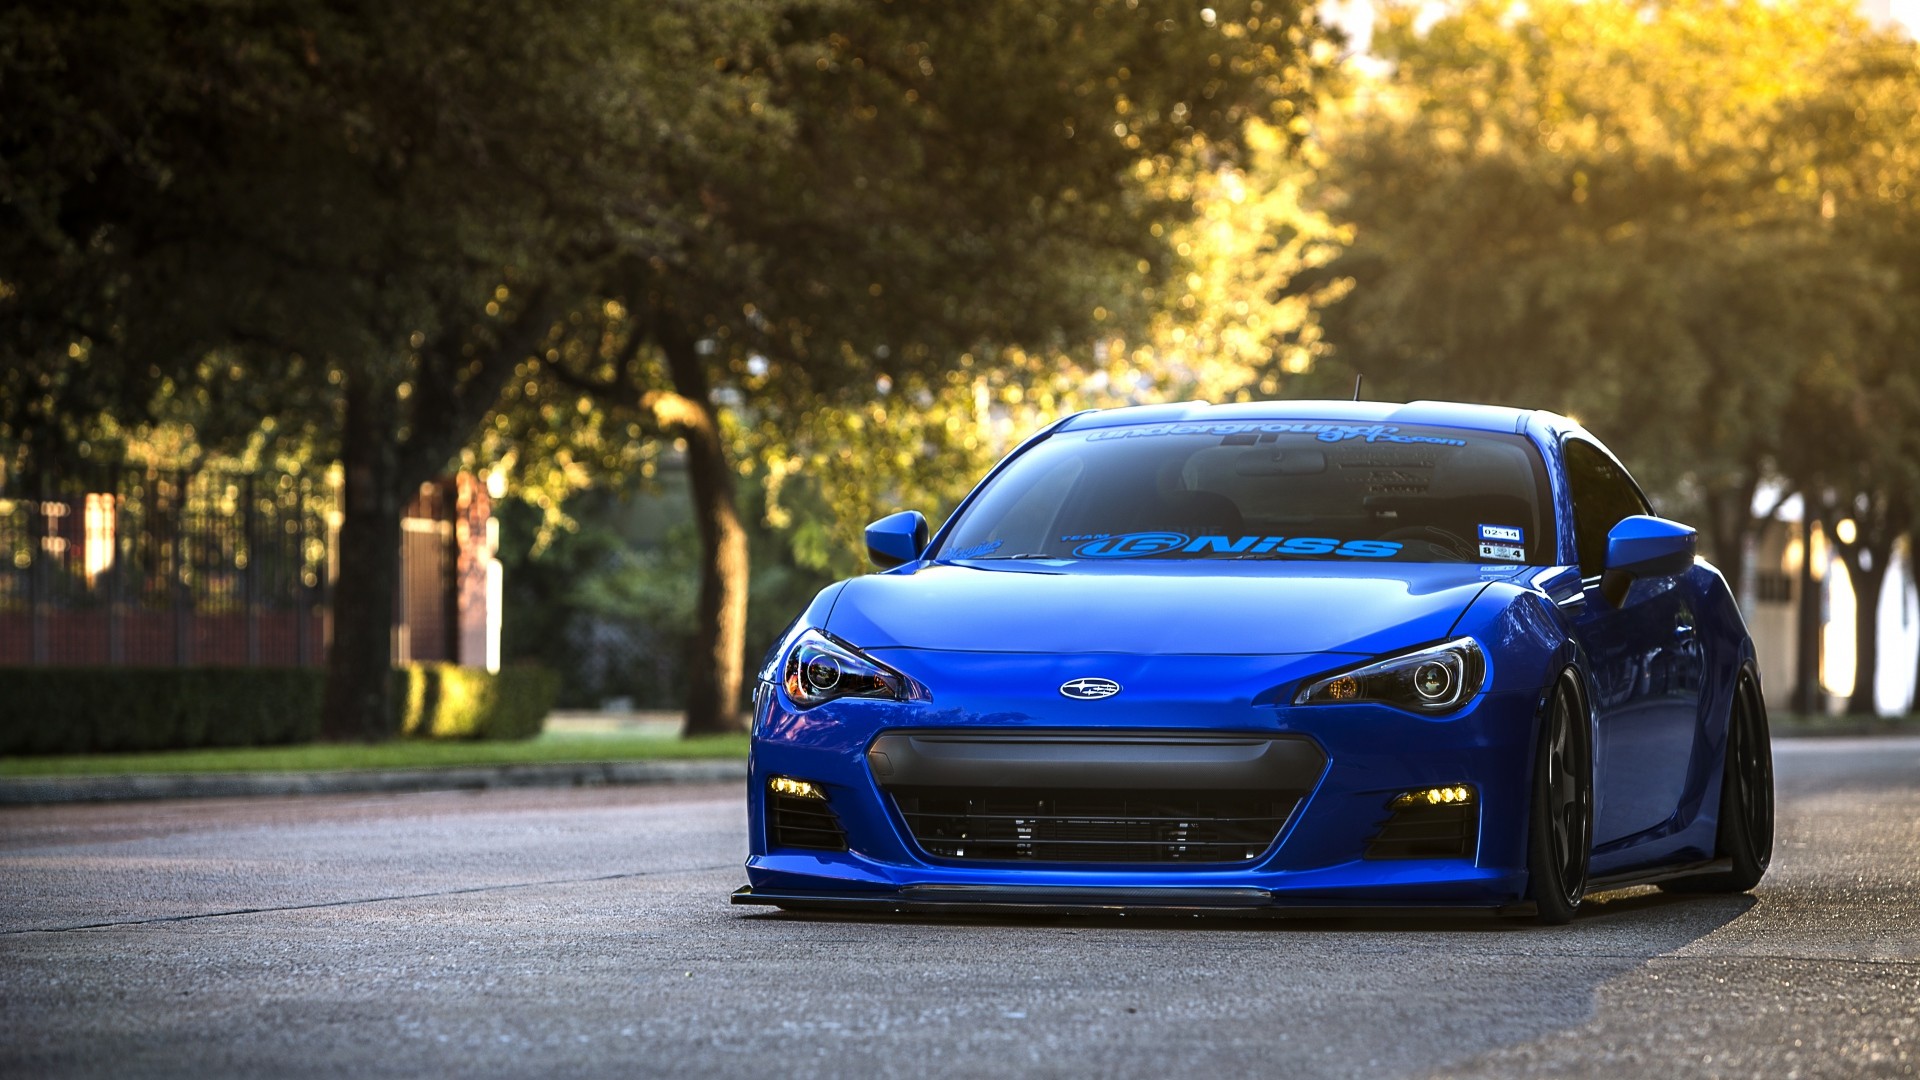 Subaru Sports Car Wallpapers Picture with HD Desktop px 802.07 KB